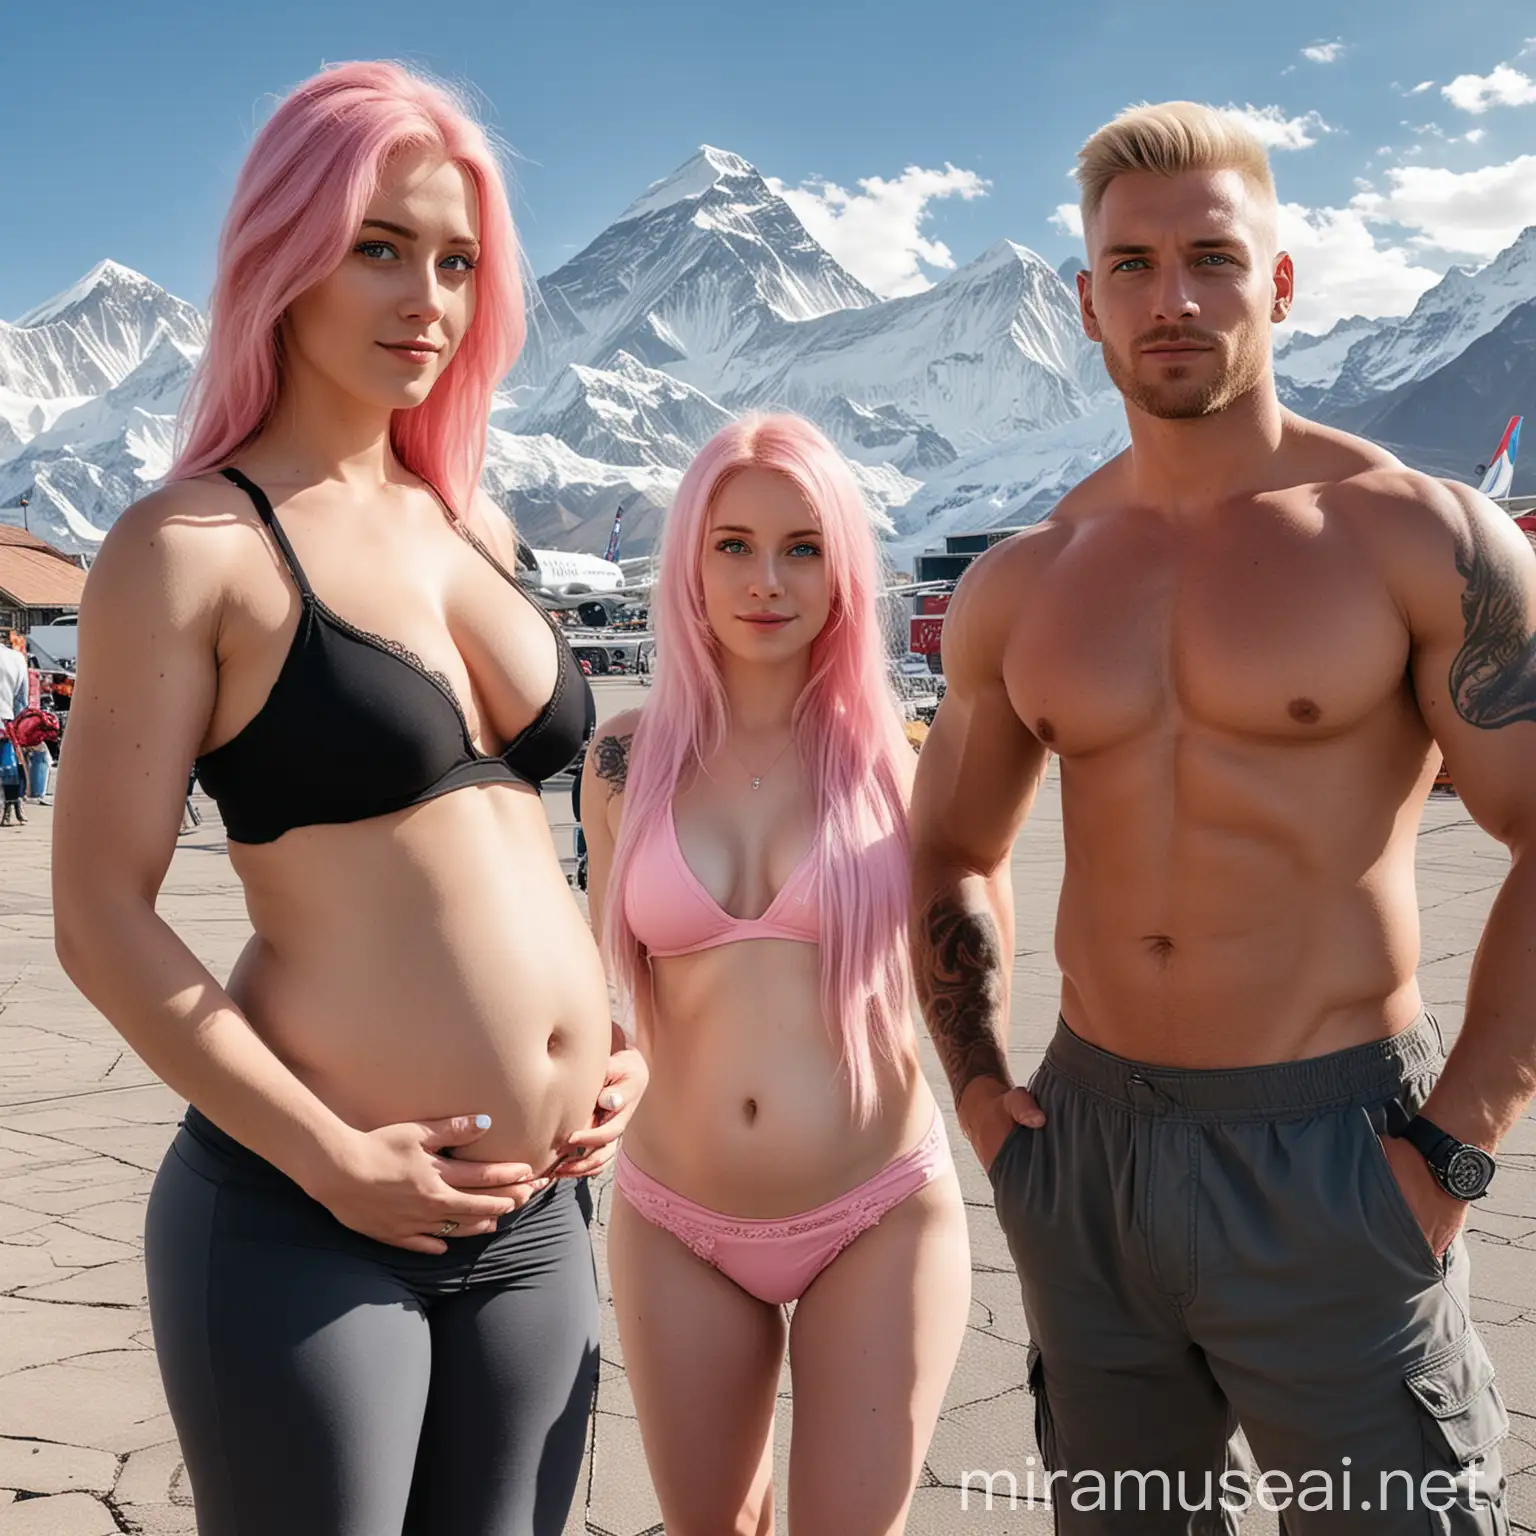 . The woman has blonde and pink hair and blue eyes and is pregnant. The man is very muscular and has a square stomach. The girls have light brown hair. In the background Mount Everest and very Big city amd airport Very very far in the city . It looks good from their luxury villa. 